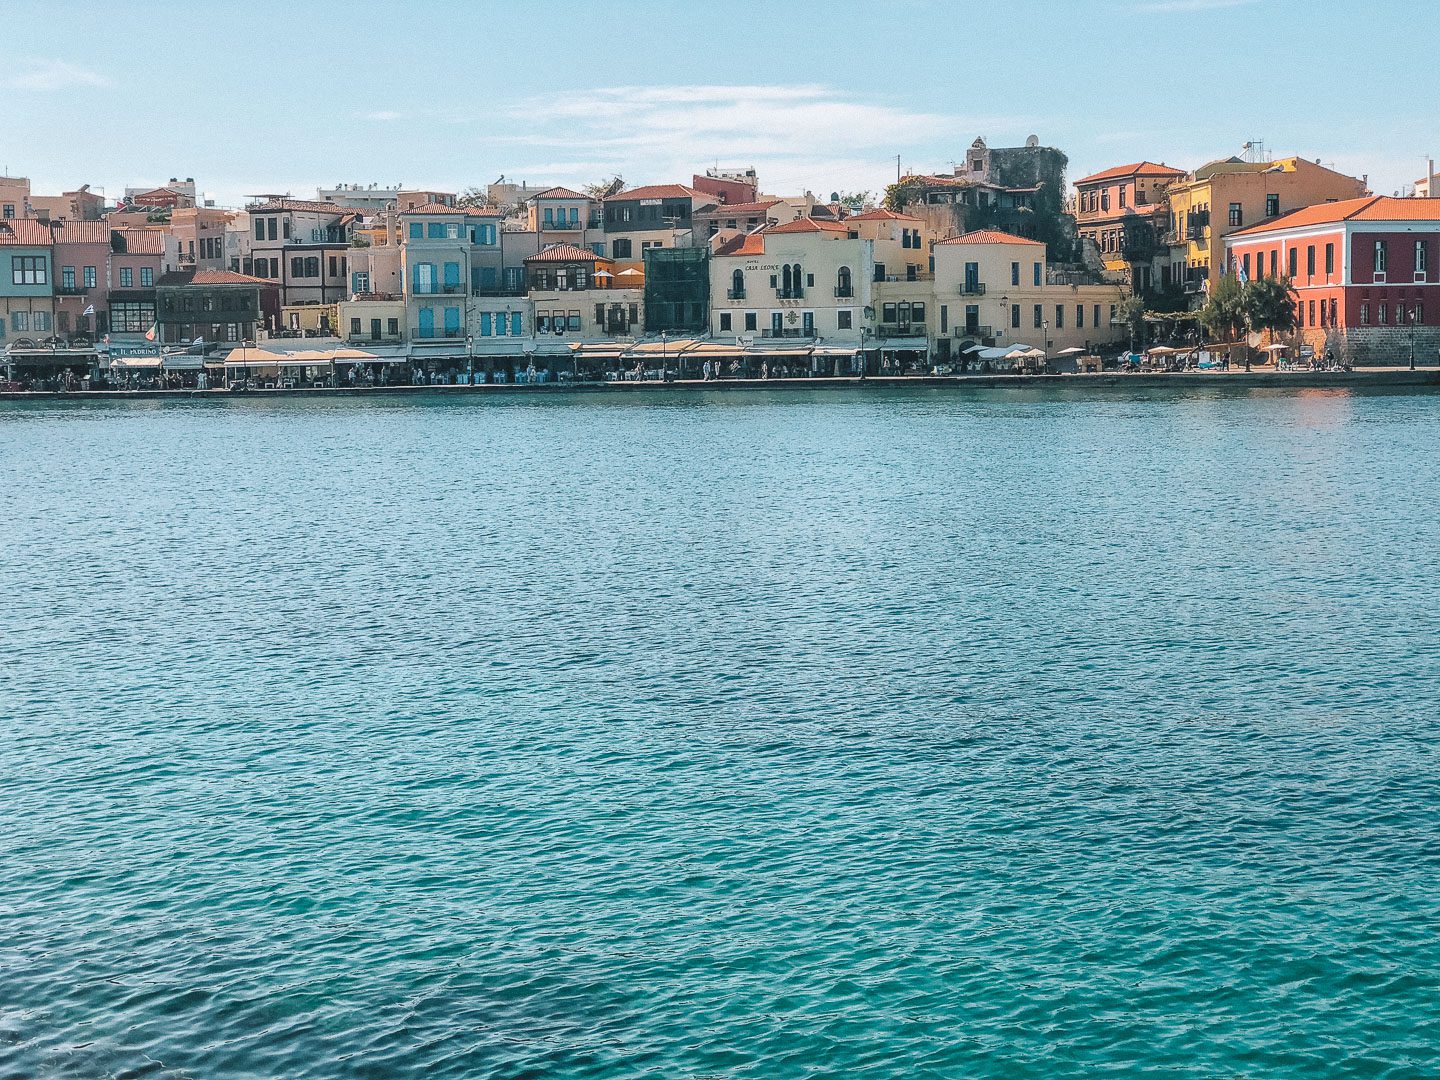 The colourful and charming town of Chania is a city on the northwest coast of the Greek island of Crete. 